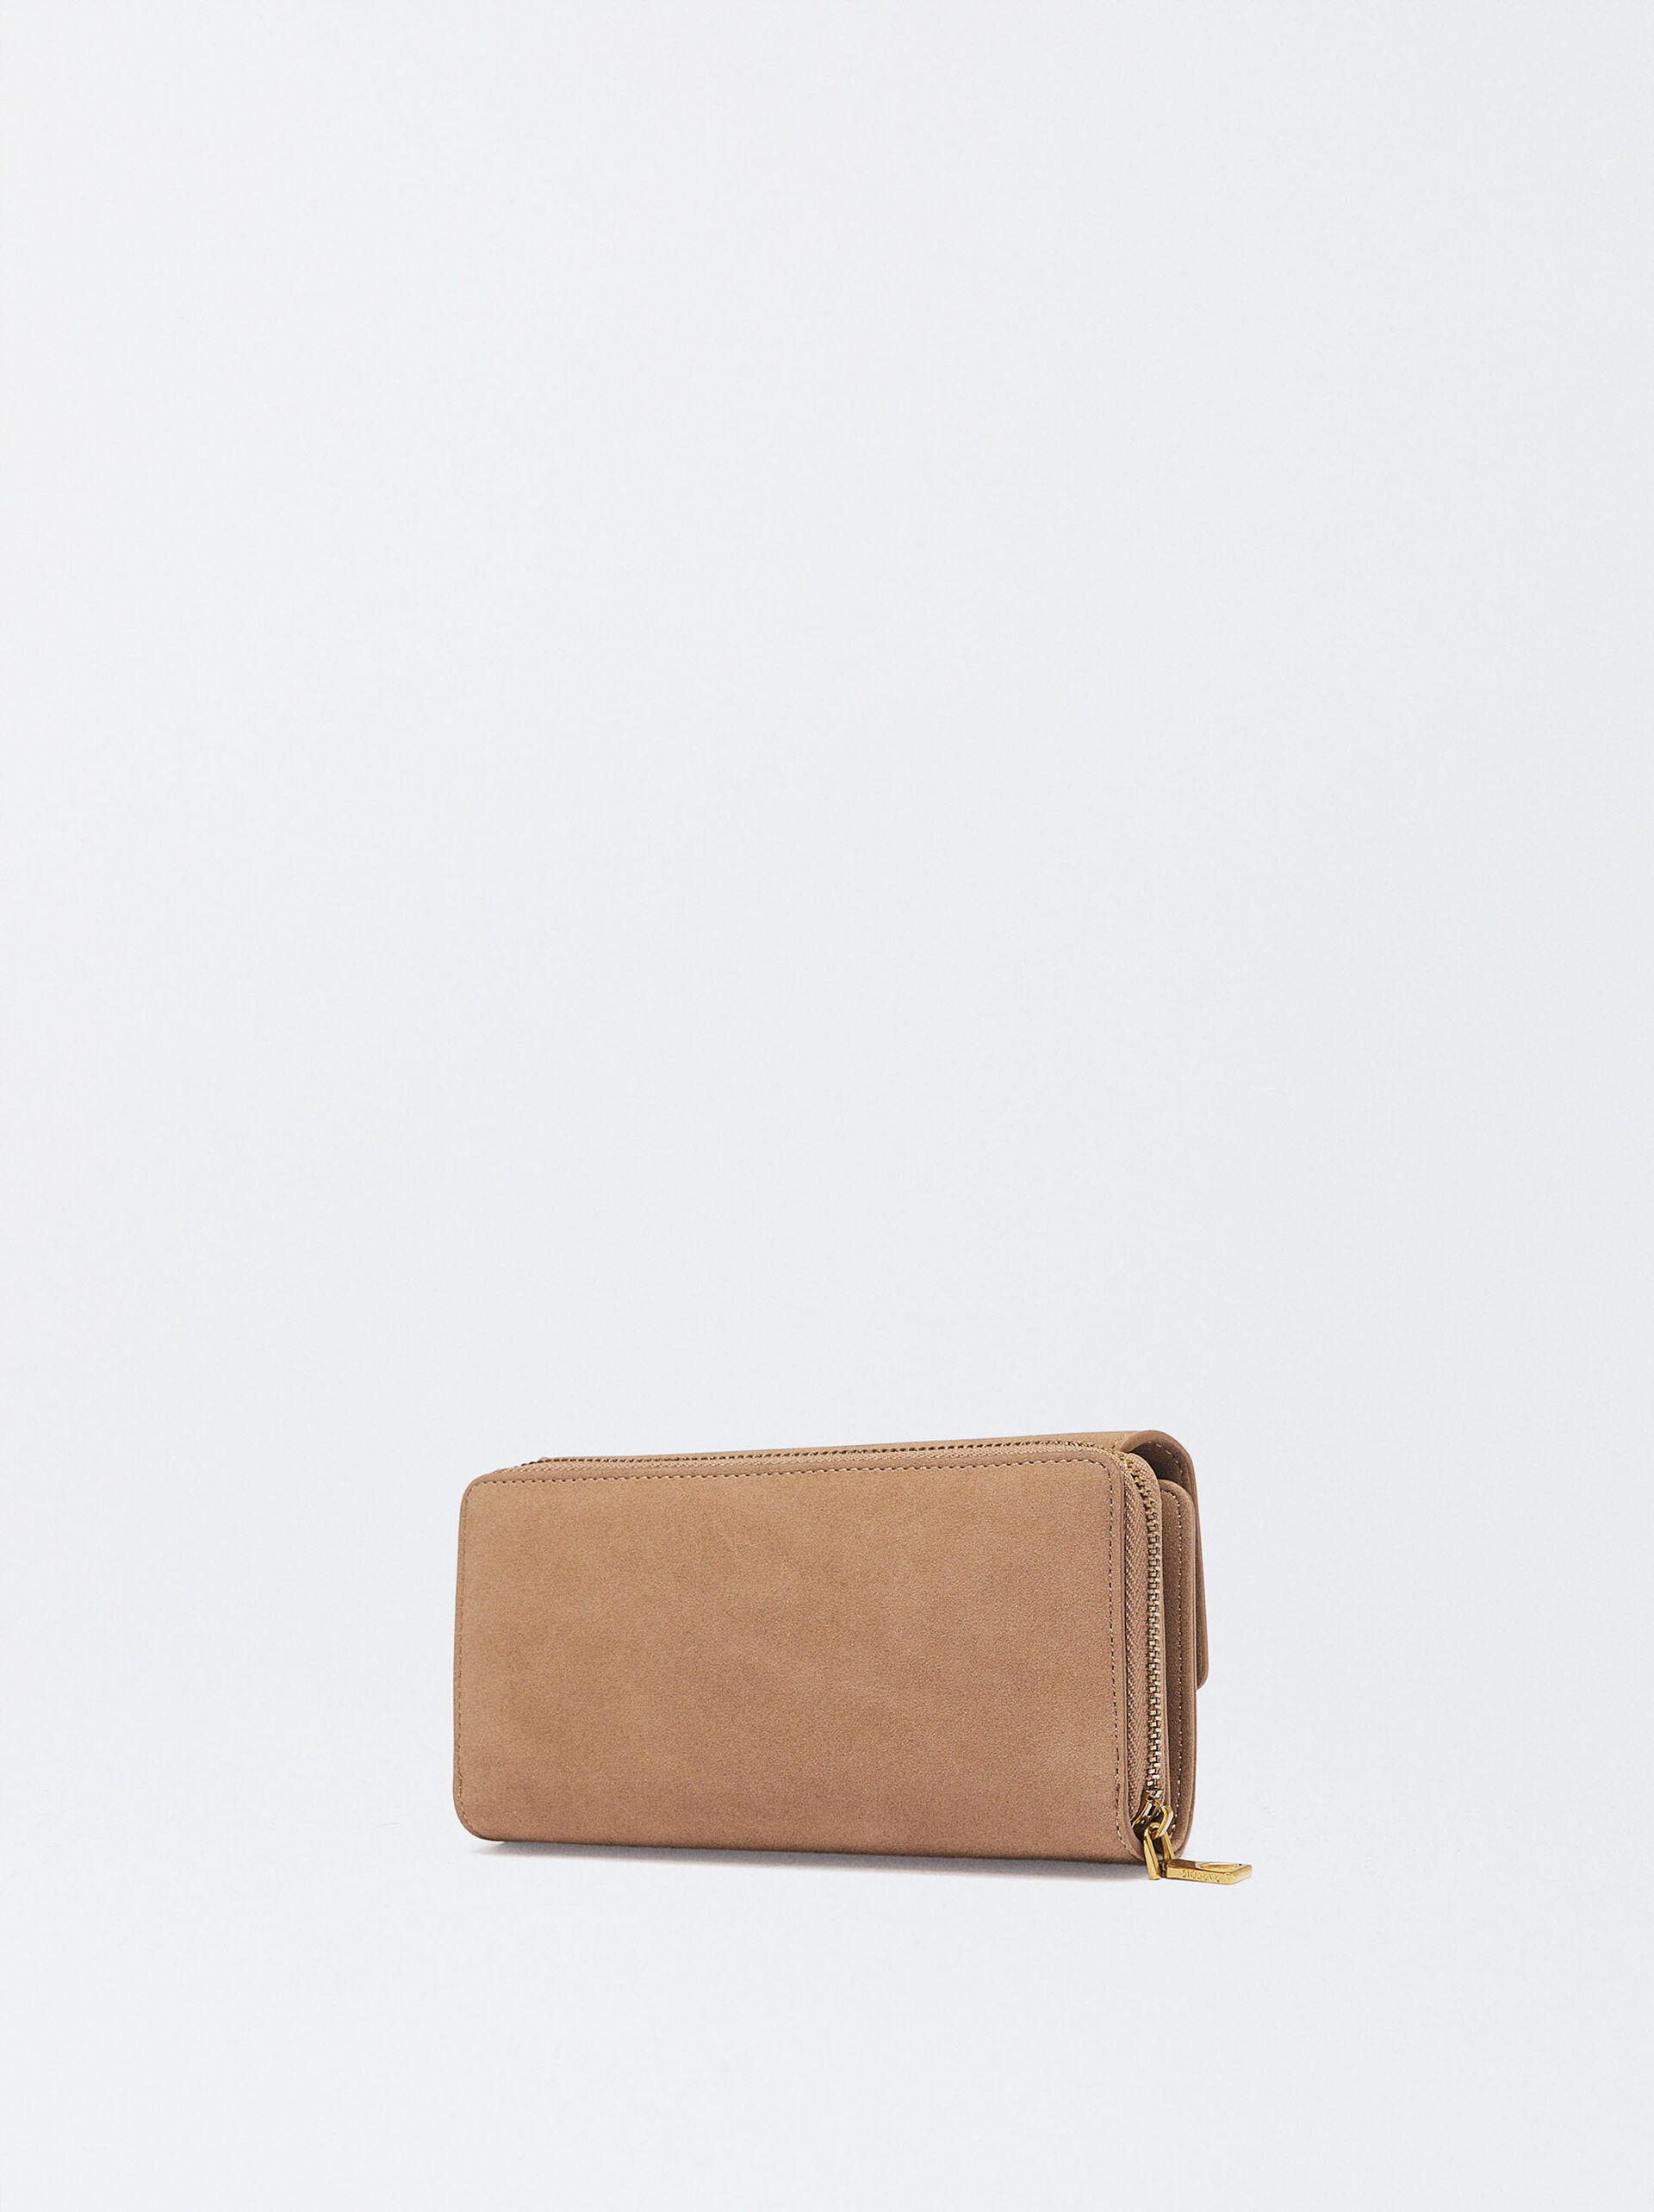 Wallet With Flap Closure image number 2.0